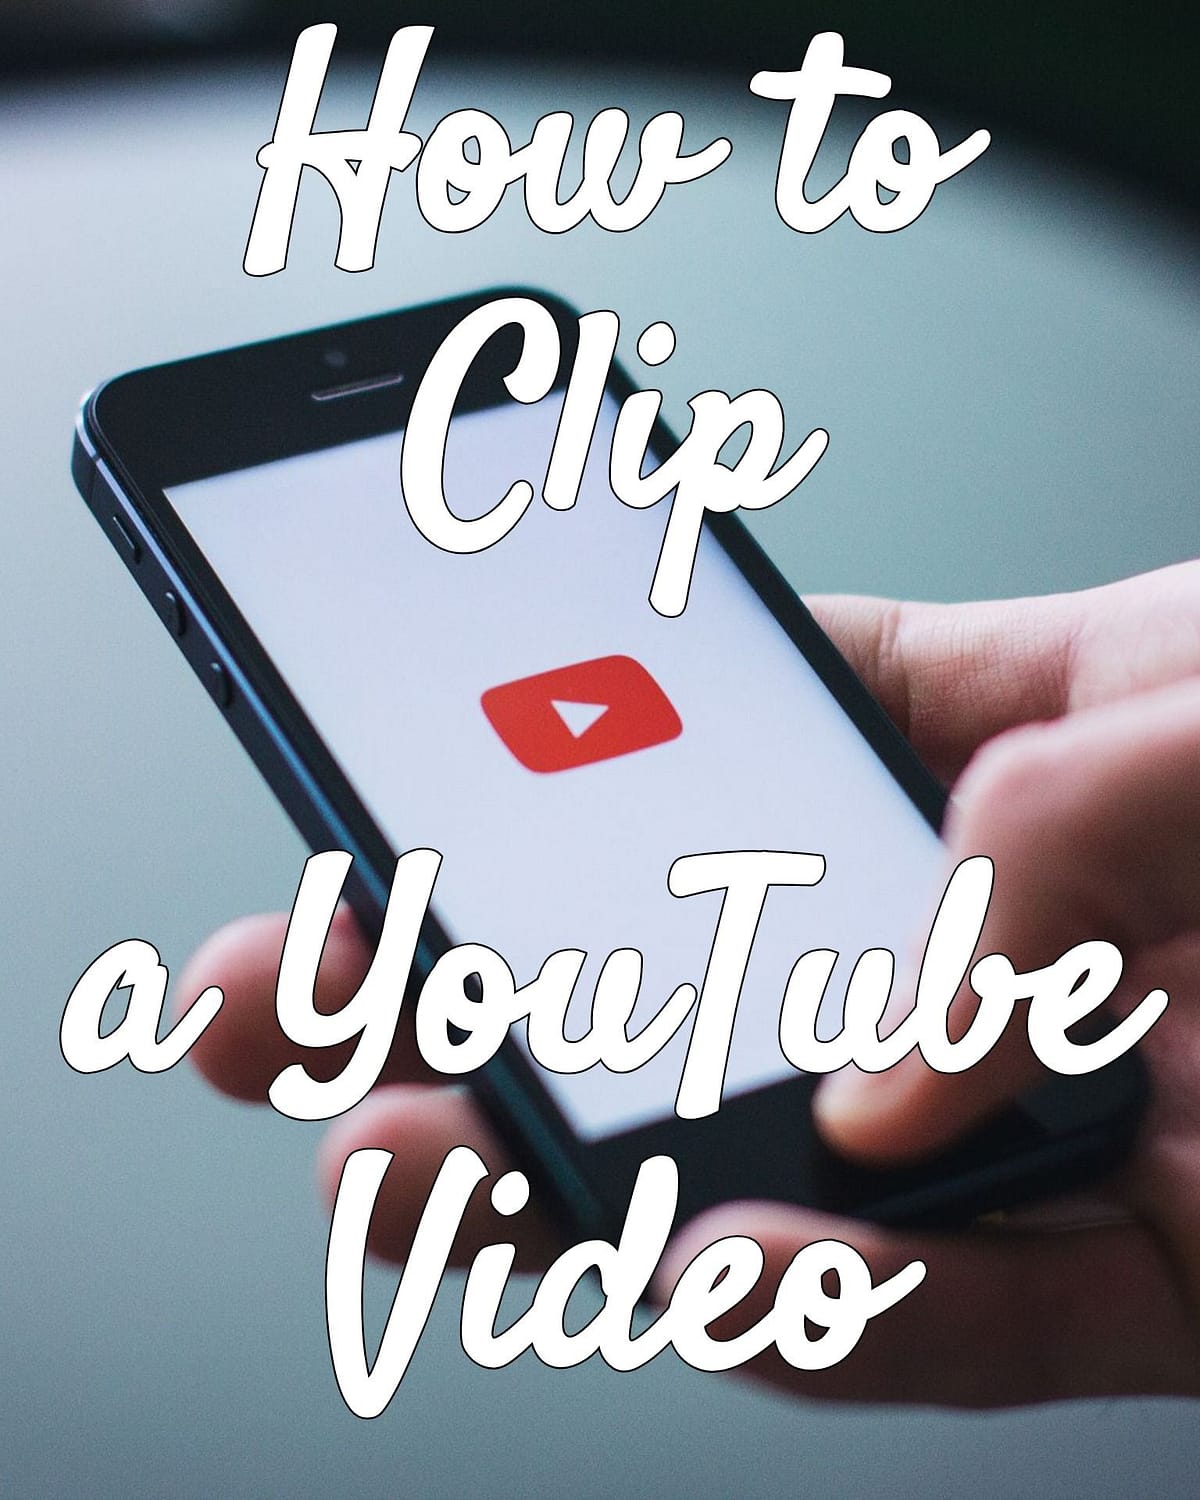 How to use youtube video free